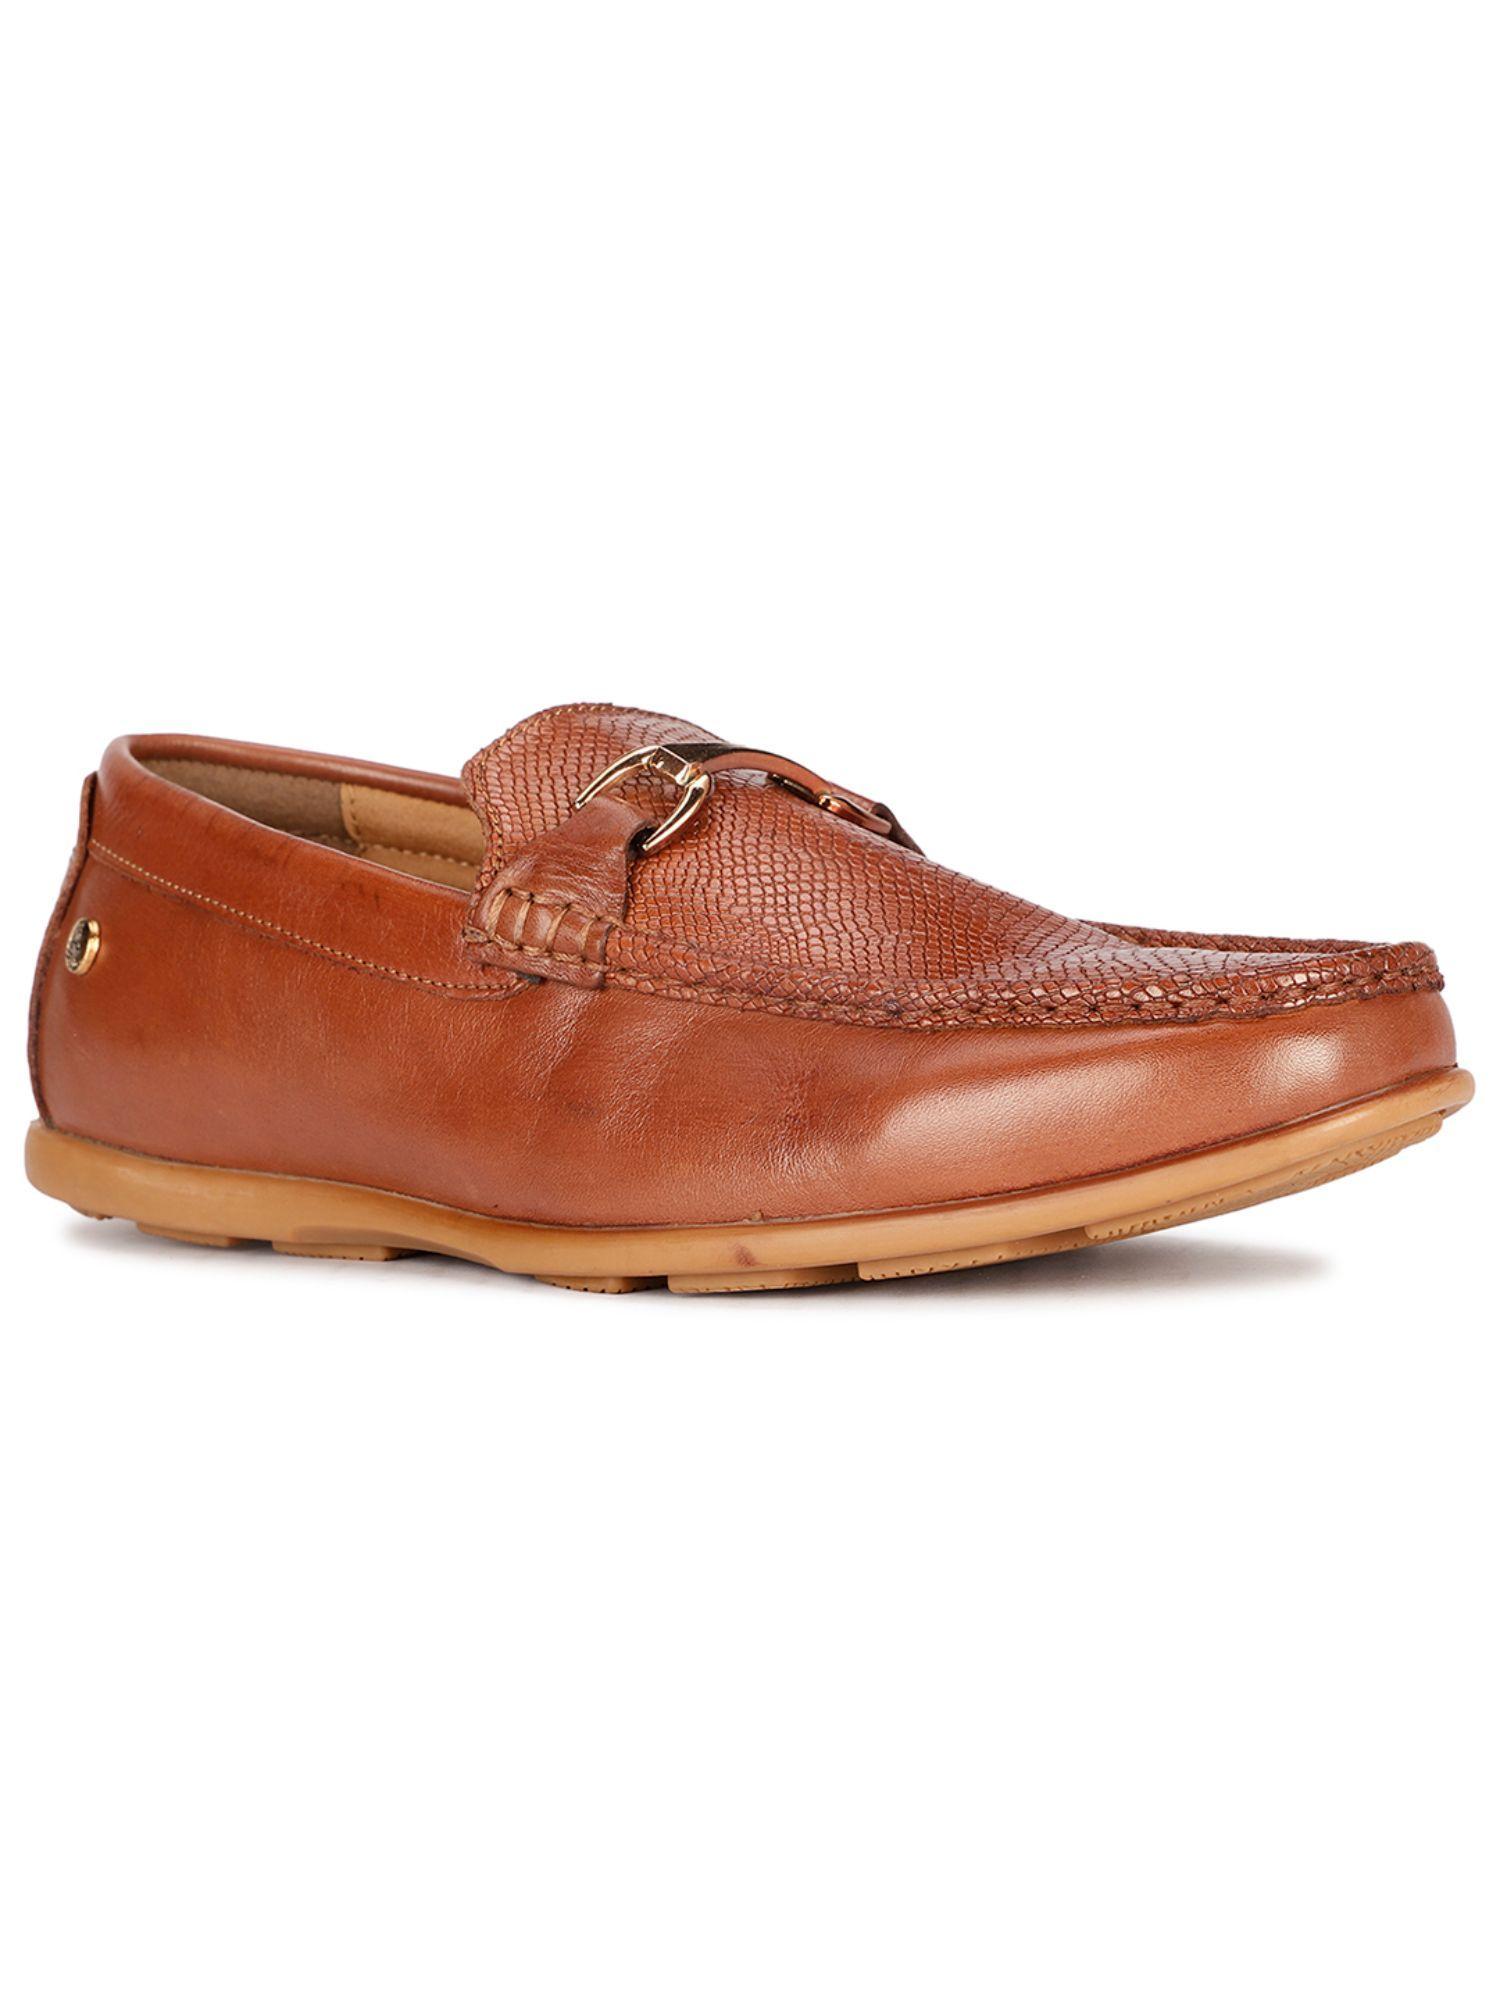 mens-tan-slip-on-casual-loafers